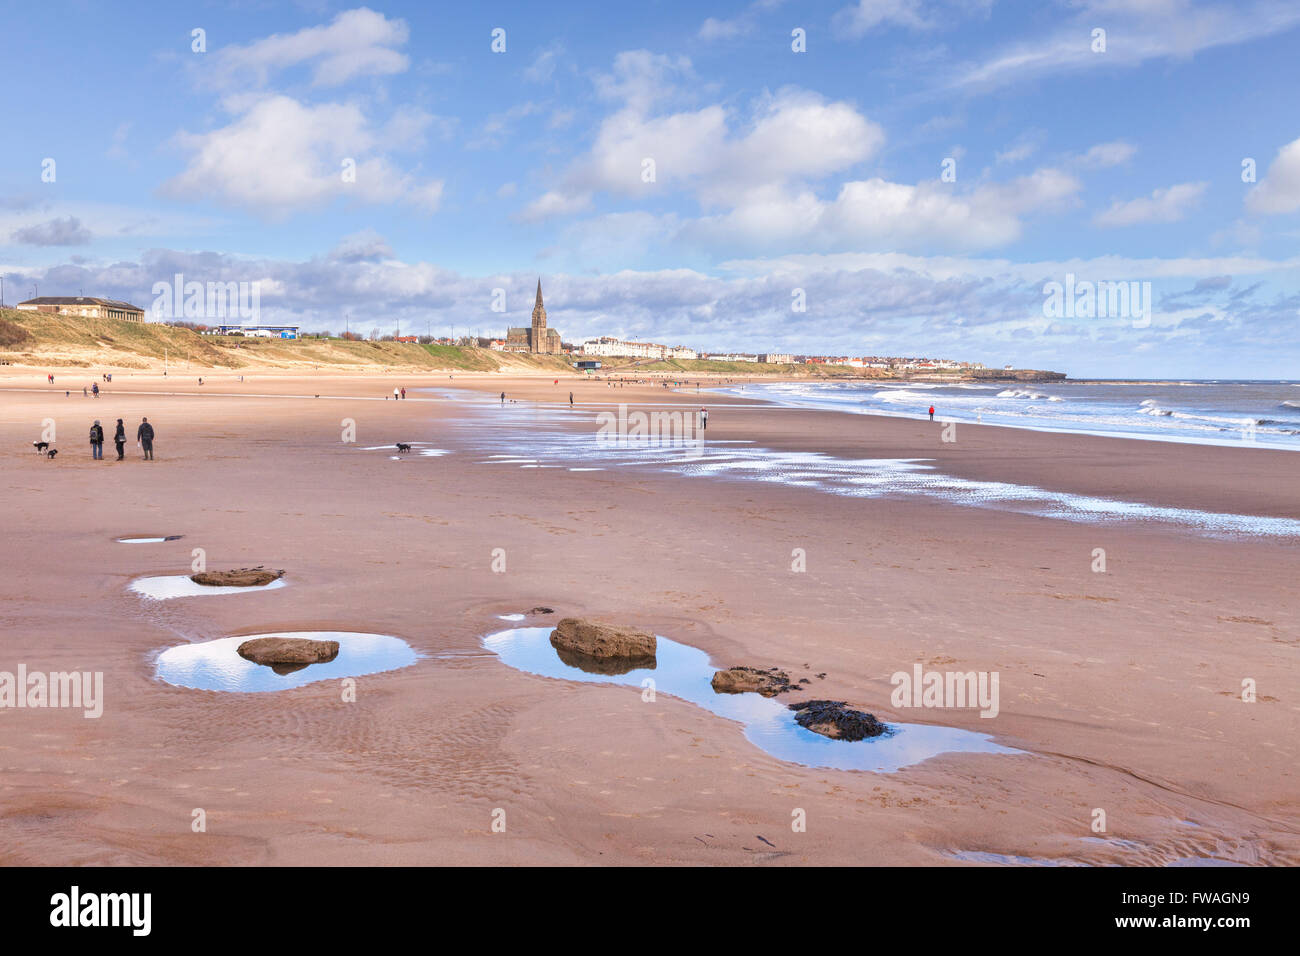 The beach at Tynemouth on a bright spring day, Tyne and Wear, England, UK Stock Photo